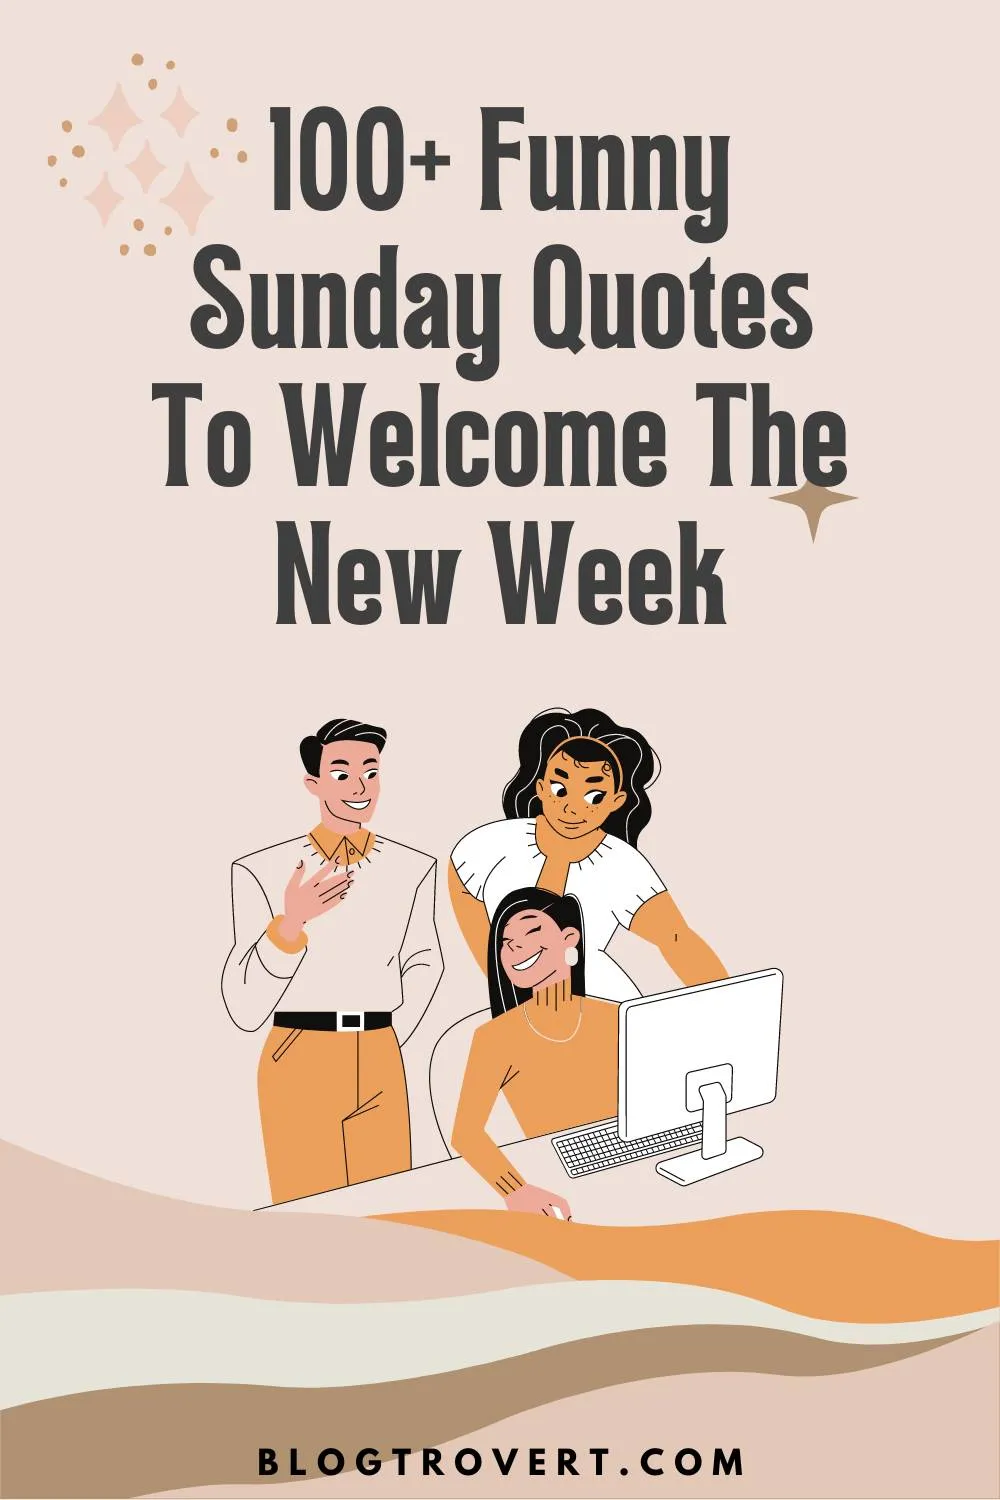 108 funny Sunday quotes to welcome the new week 41